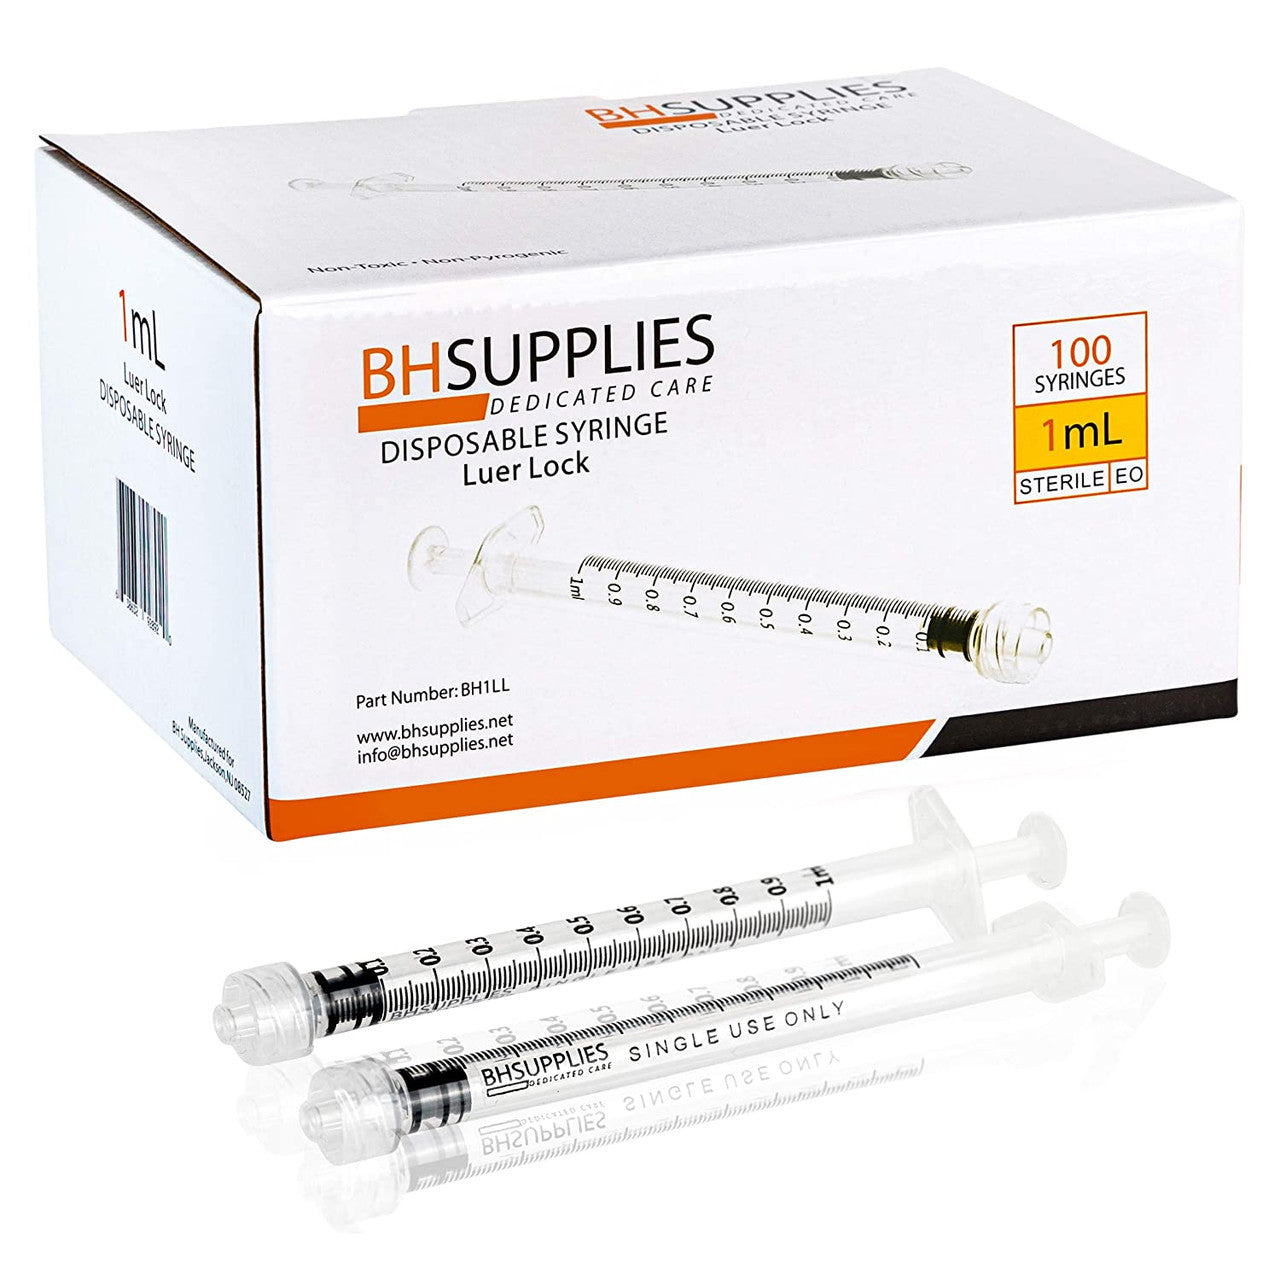 1ml Syringe Sterile with Luer Lock Tip- (No Needle) Individually Seale